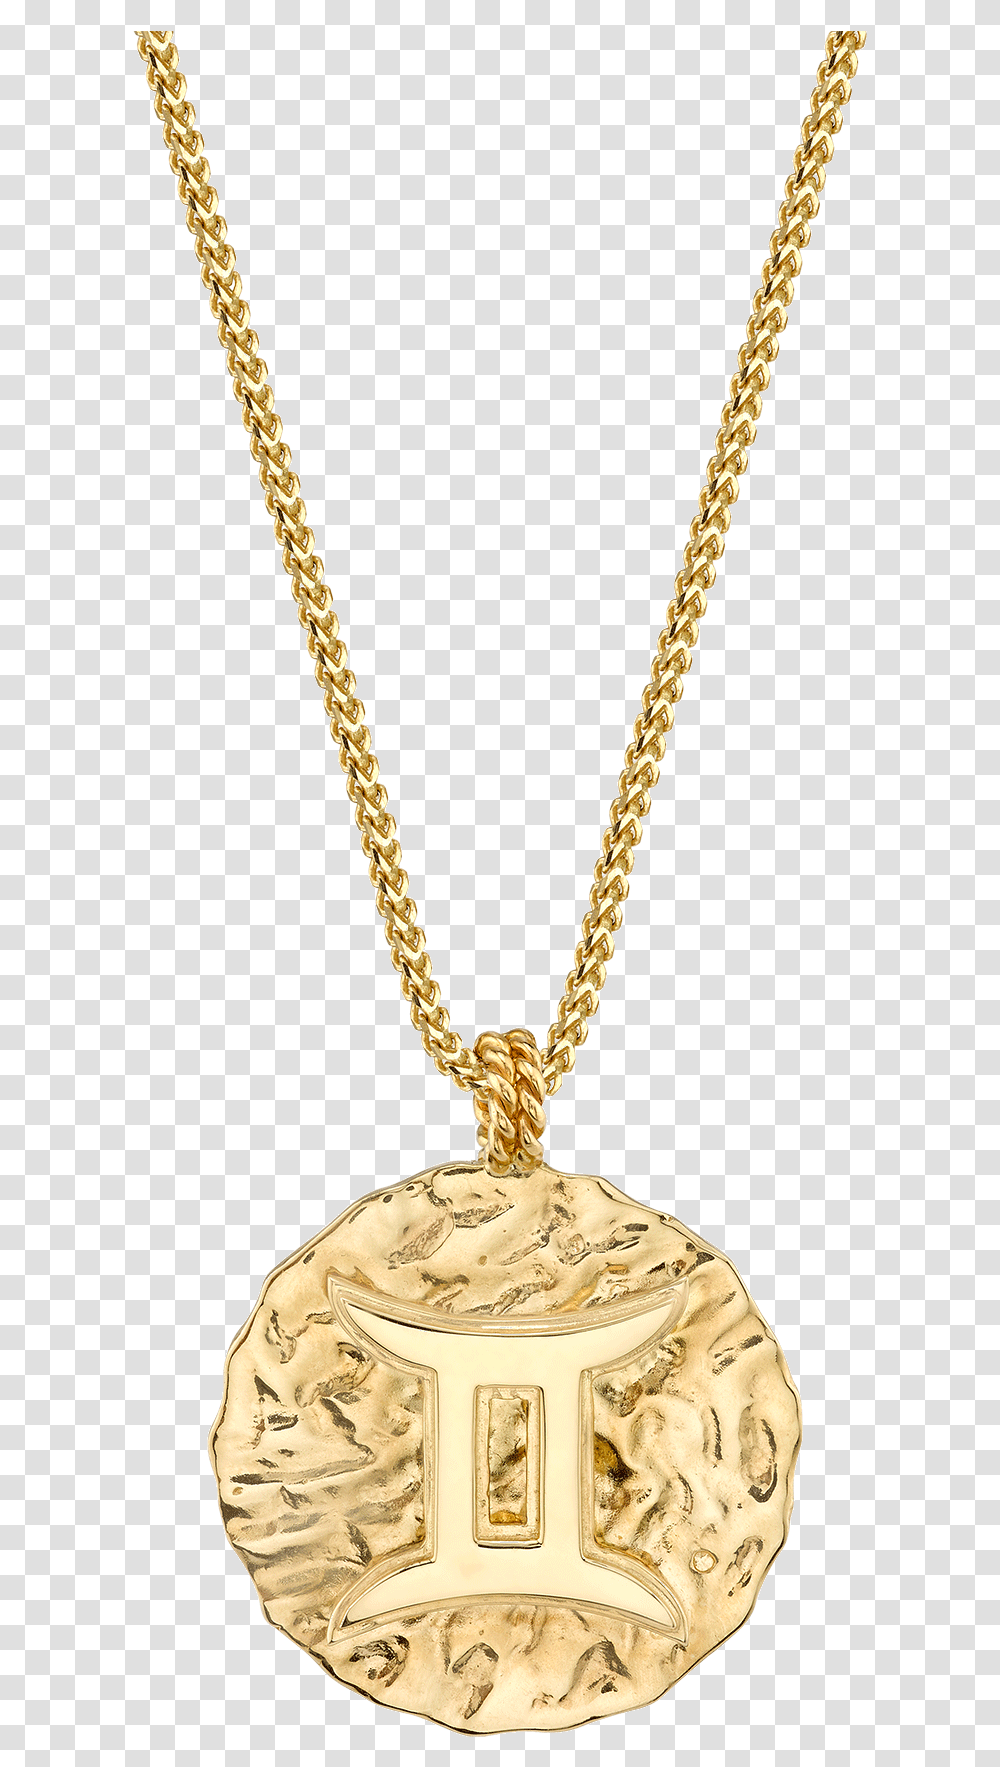 Amber Sceats Double Coin Necklace, Pendant, Locket, Jewelry, Accessories Transparent Png